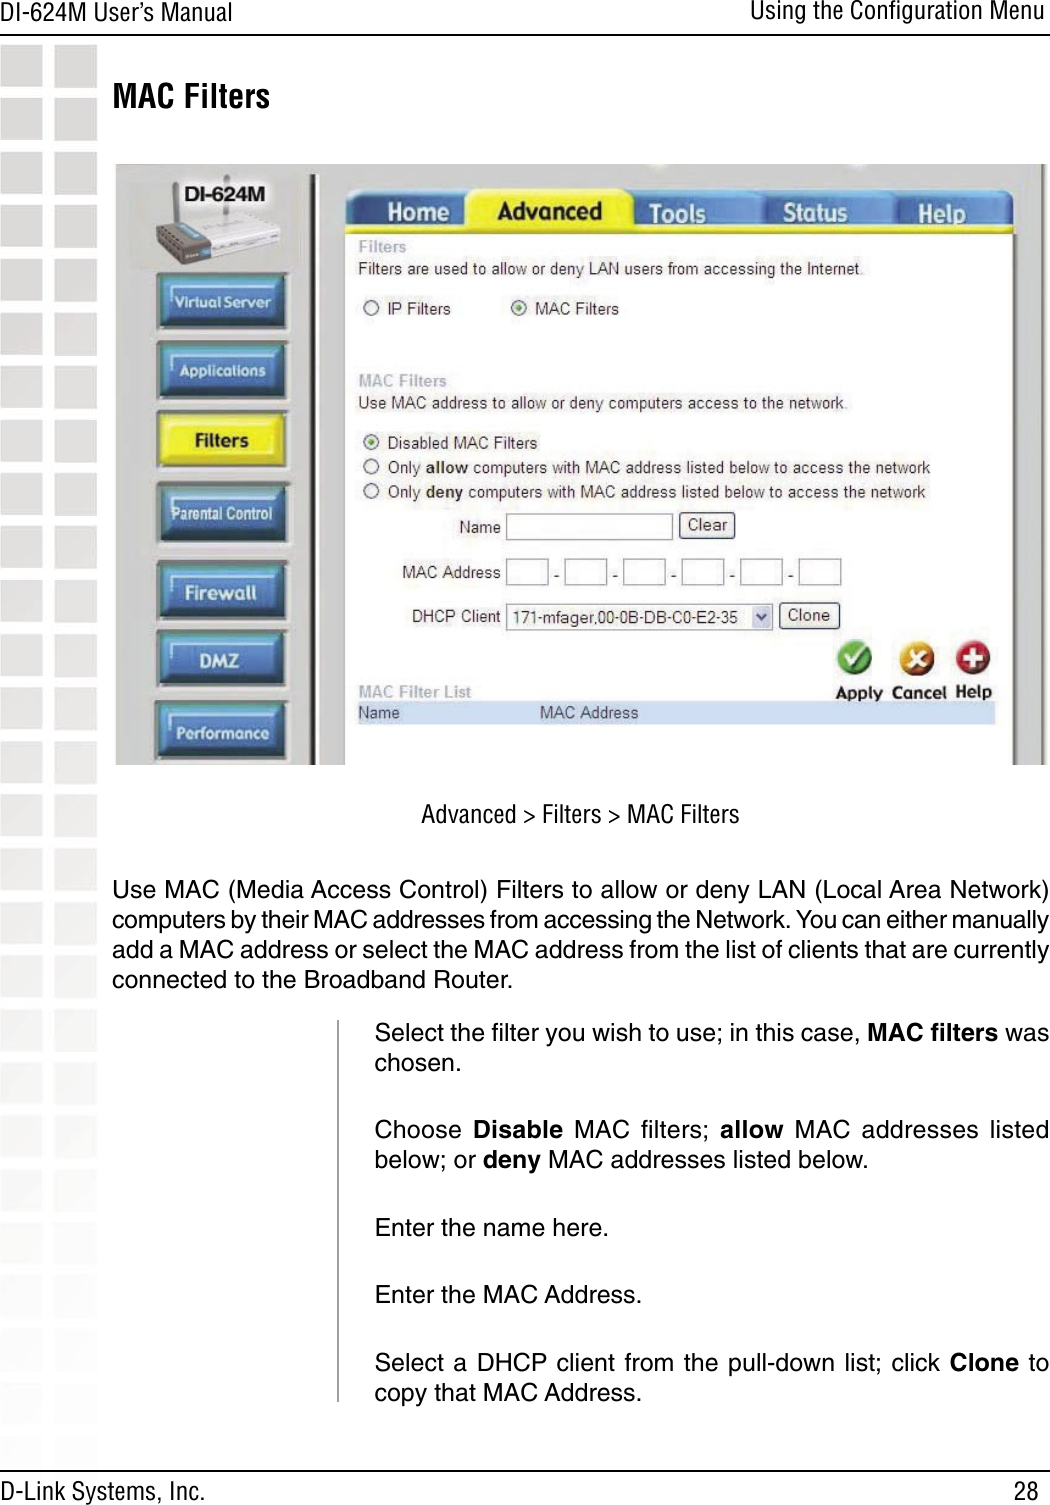 28DI-624M User’s Manual D-Link Systems, Inc.Using the Conﬁguration MenuMAC FiltersUse MAC (Media Access Control) Filters to allow or deny LAN (Local Area Network) computers by their MAC addresses from accessing the Network. You can either manually add a MAC address or select the MAC address from the list of clients that are currently connected to the Broadband Router.Select the ﬁlter you wish to use; in this case, MAC ﬁlters was chosen.Choose  Disable  MAC  ﬁlters;  allow  MAC  addresses  listed below; or deny MAC addresses listed below.   Enter the name here.  Enter the MAC Address.  Select a DHCP client from the pull-down list; click Clone to copy that MAC Address. Advanced &gt; Filters &gt; MAC Filters